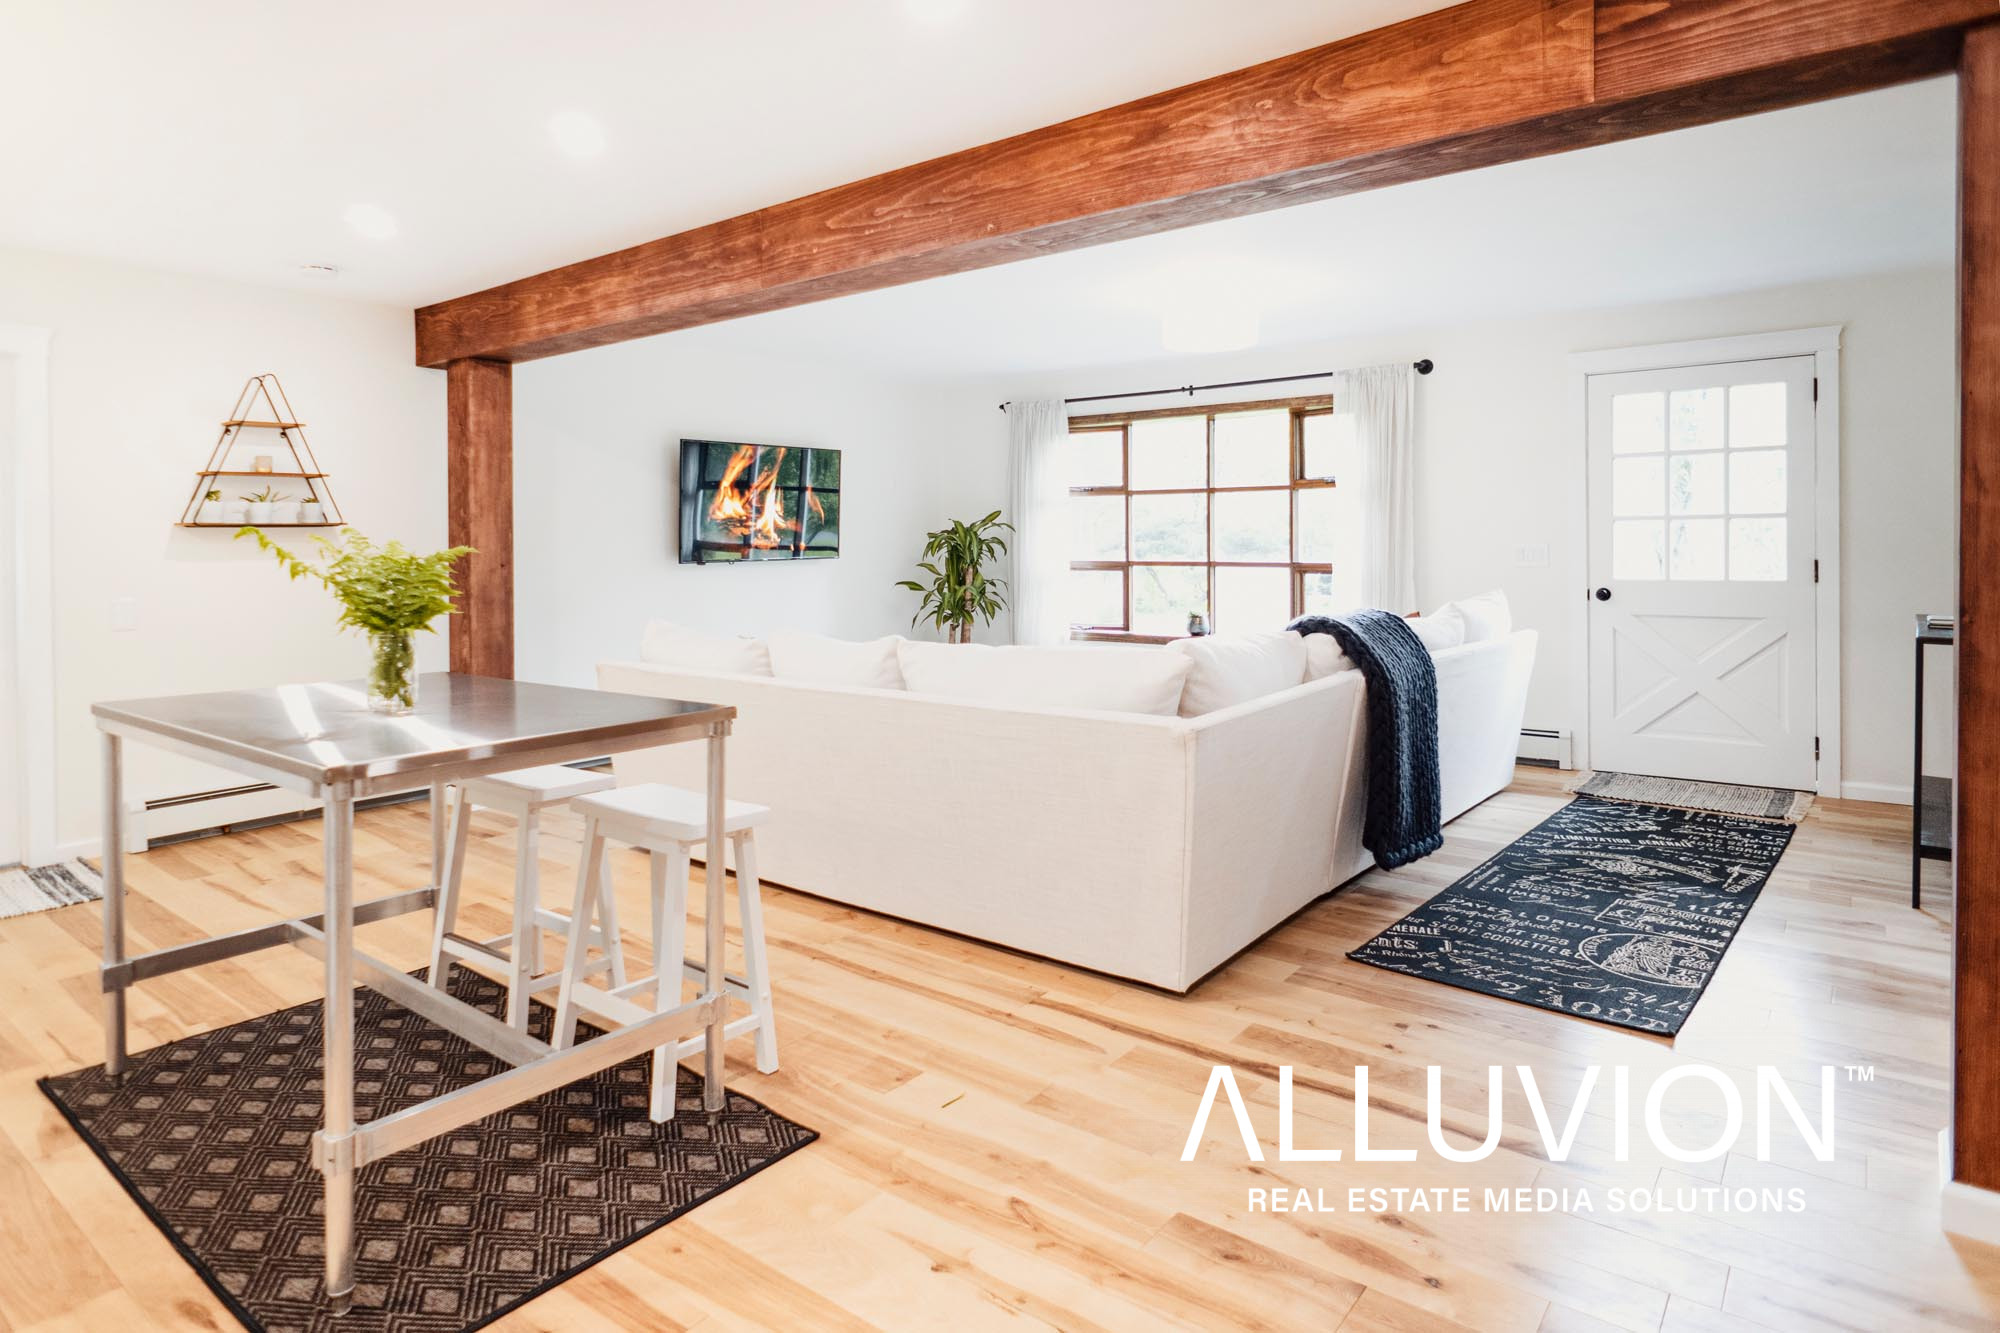 Modern Rustic Airbnb Home in Staatsburg, NY – Hudson Valley Vacation Rental Photography – Vacation Rental Management – ALLUVION Real Estate